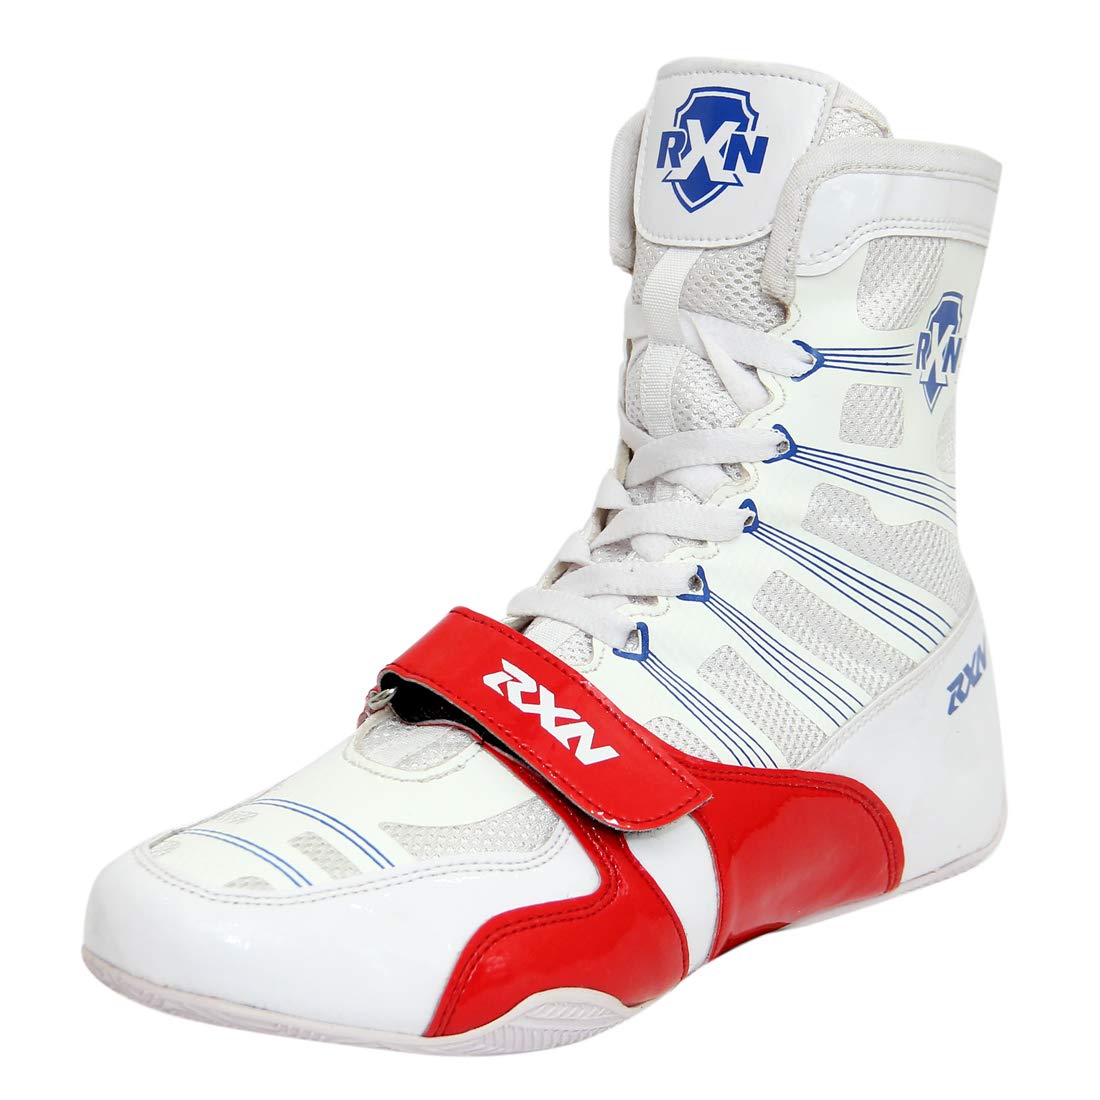 RXN Knockout White/Red Boxing Shoes